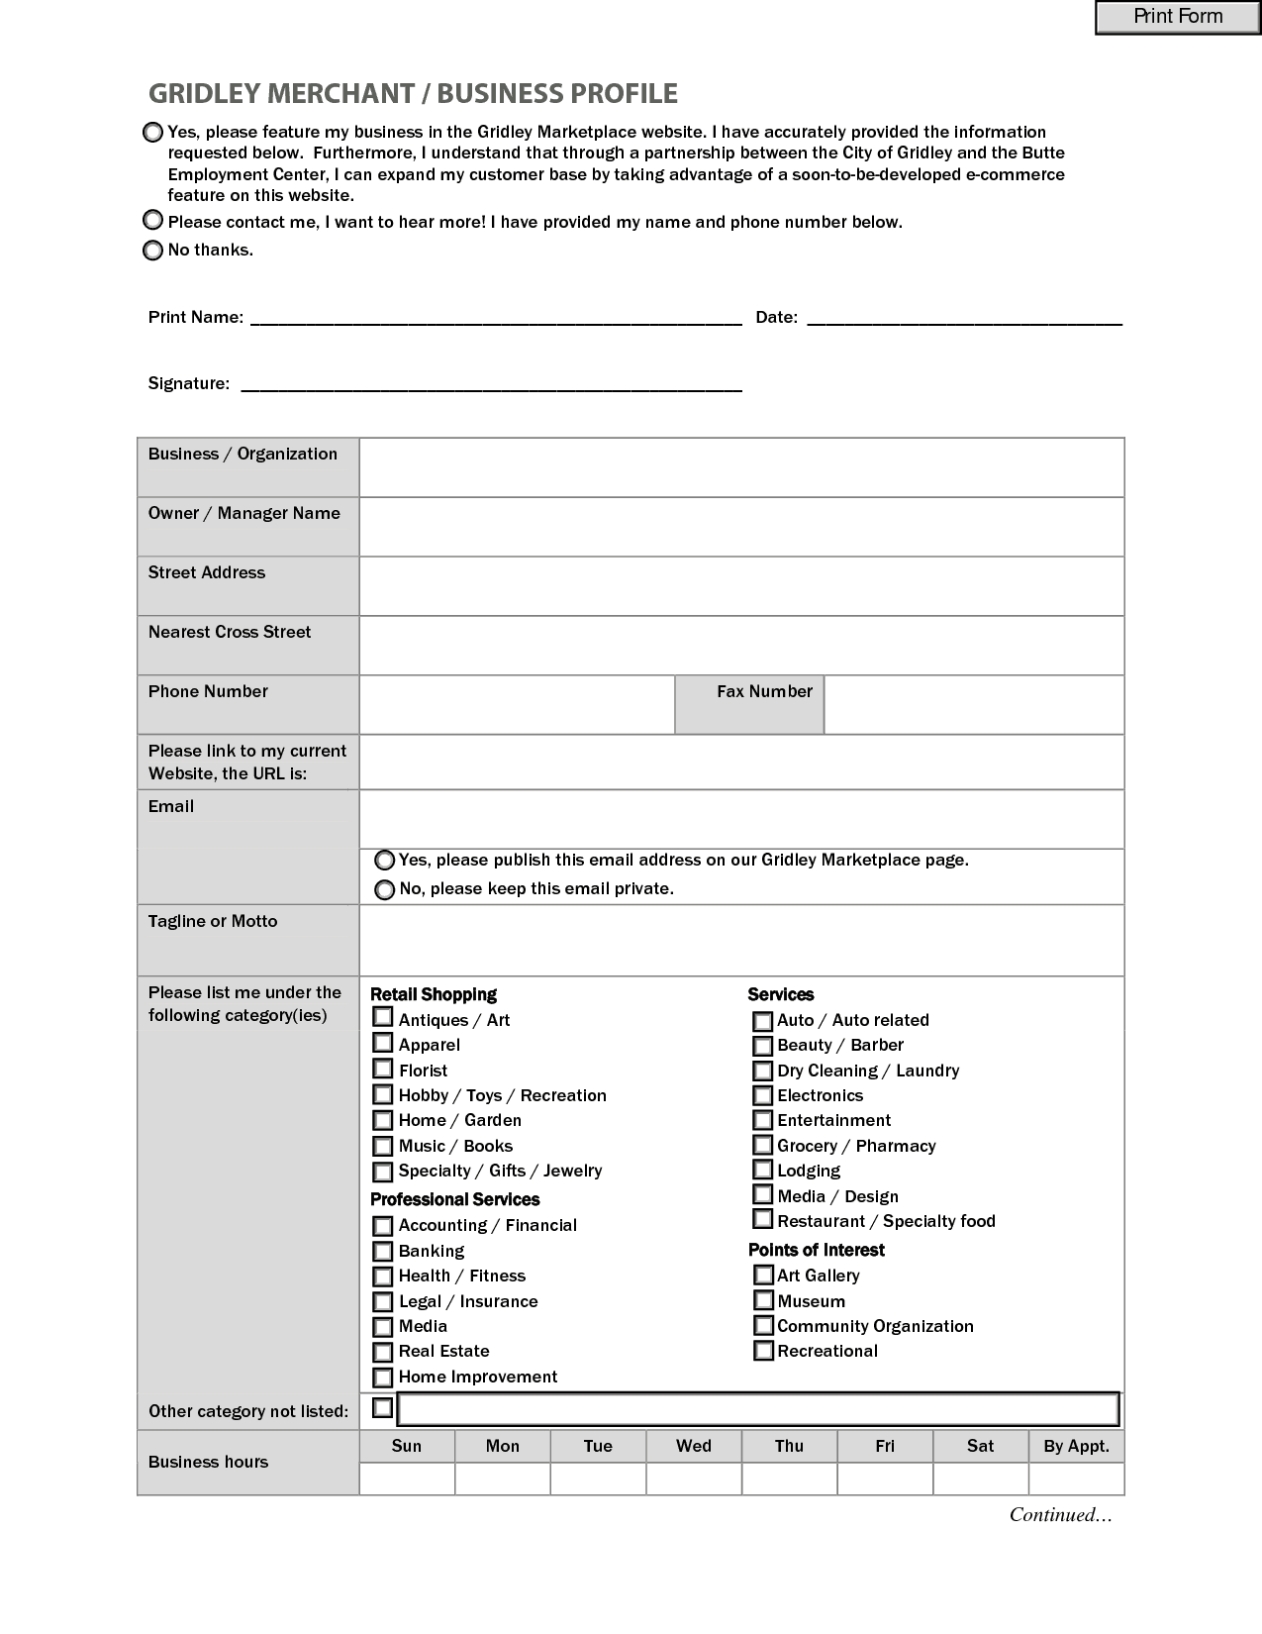 Company Profile Templates - Word Excel Samples In Free Business Profile Template Download